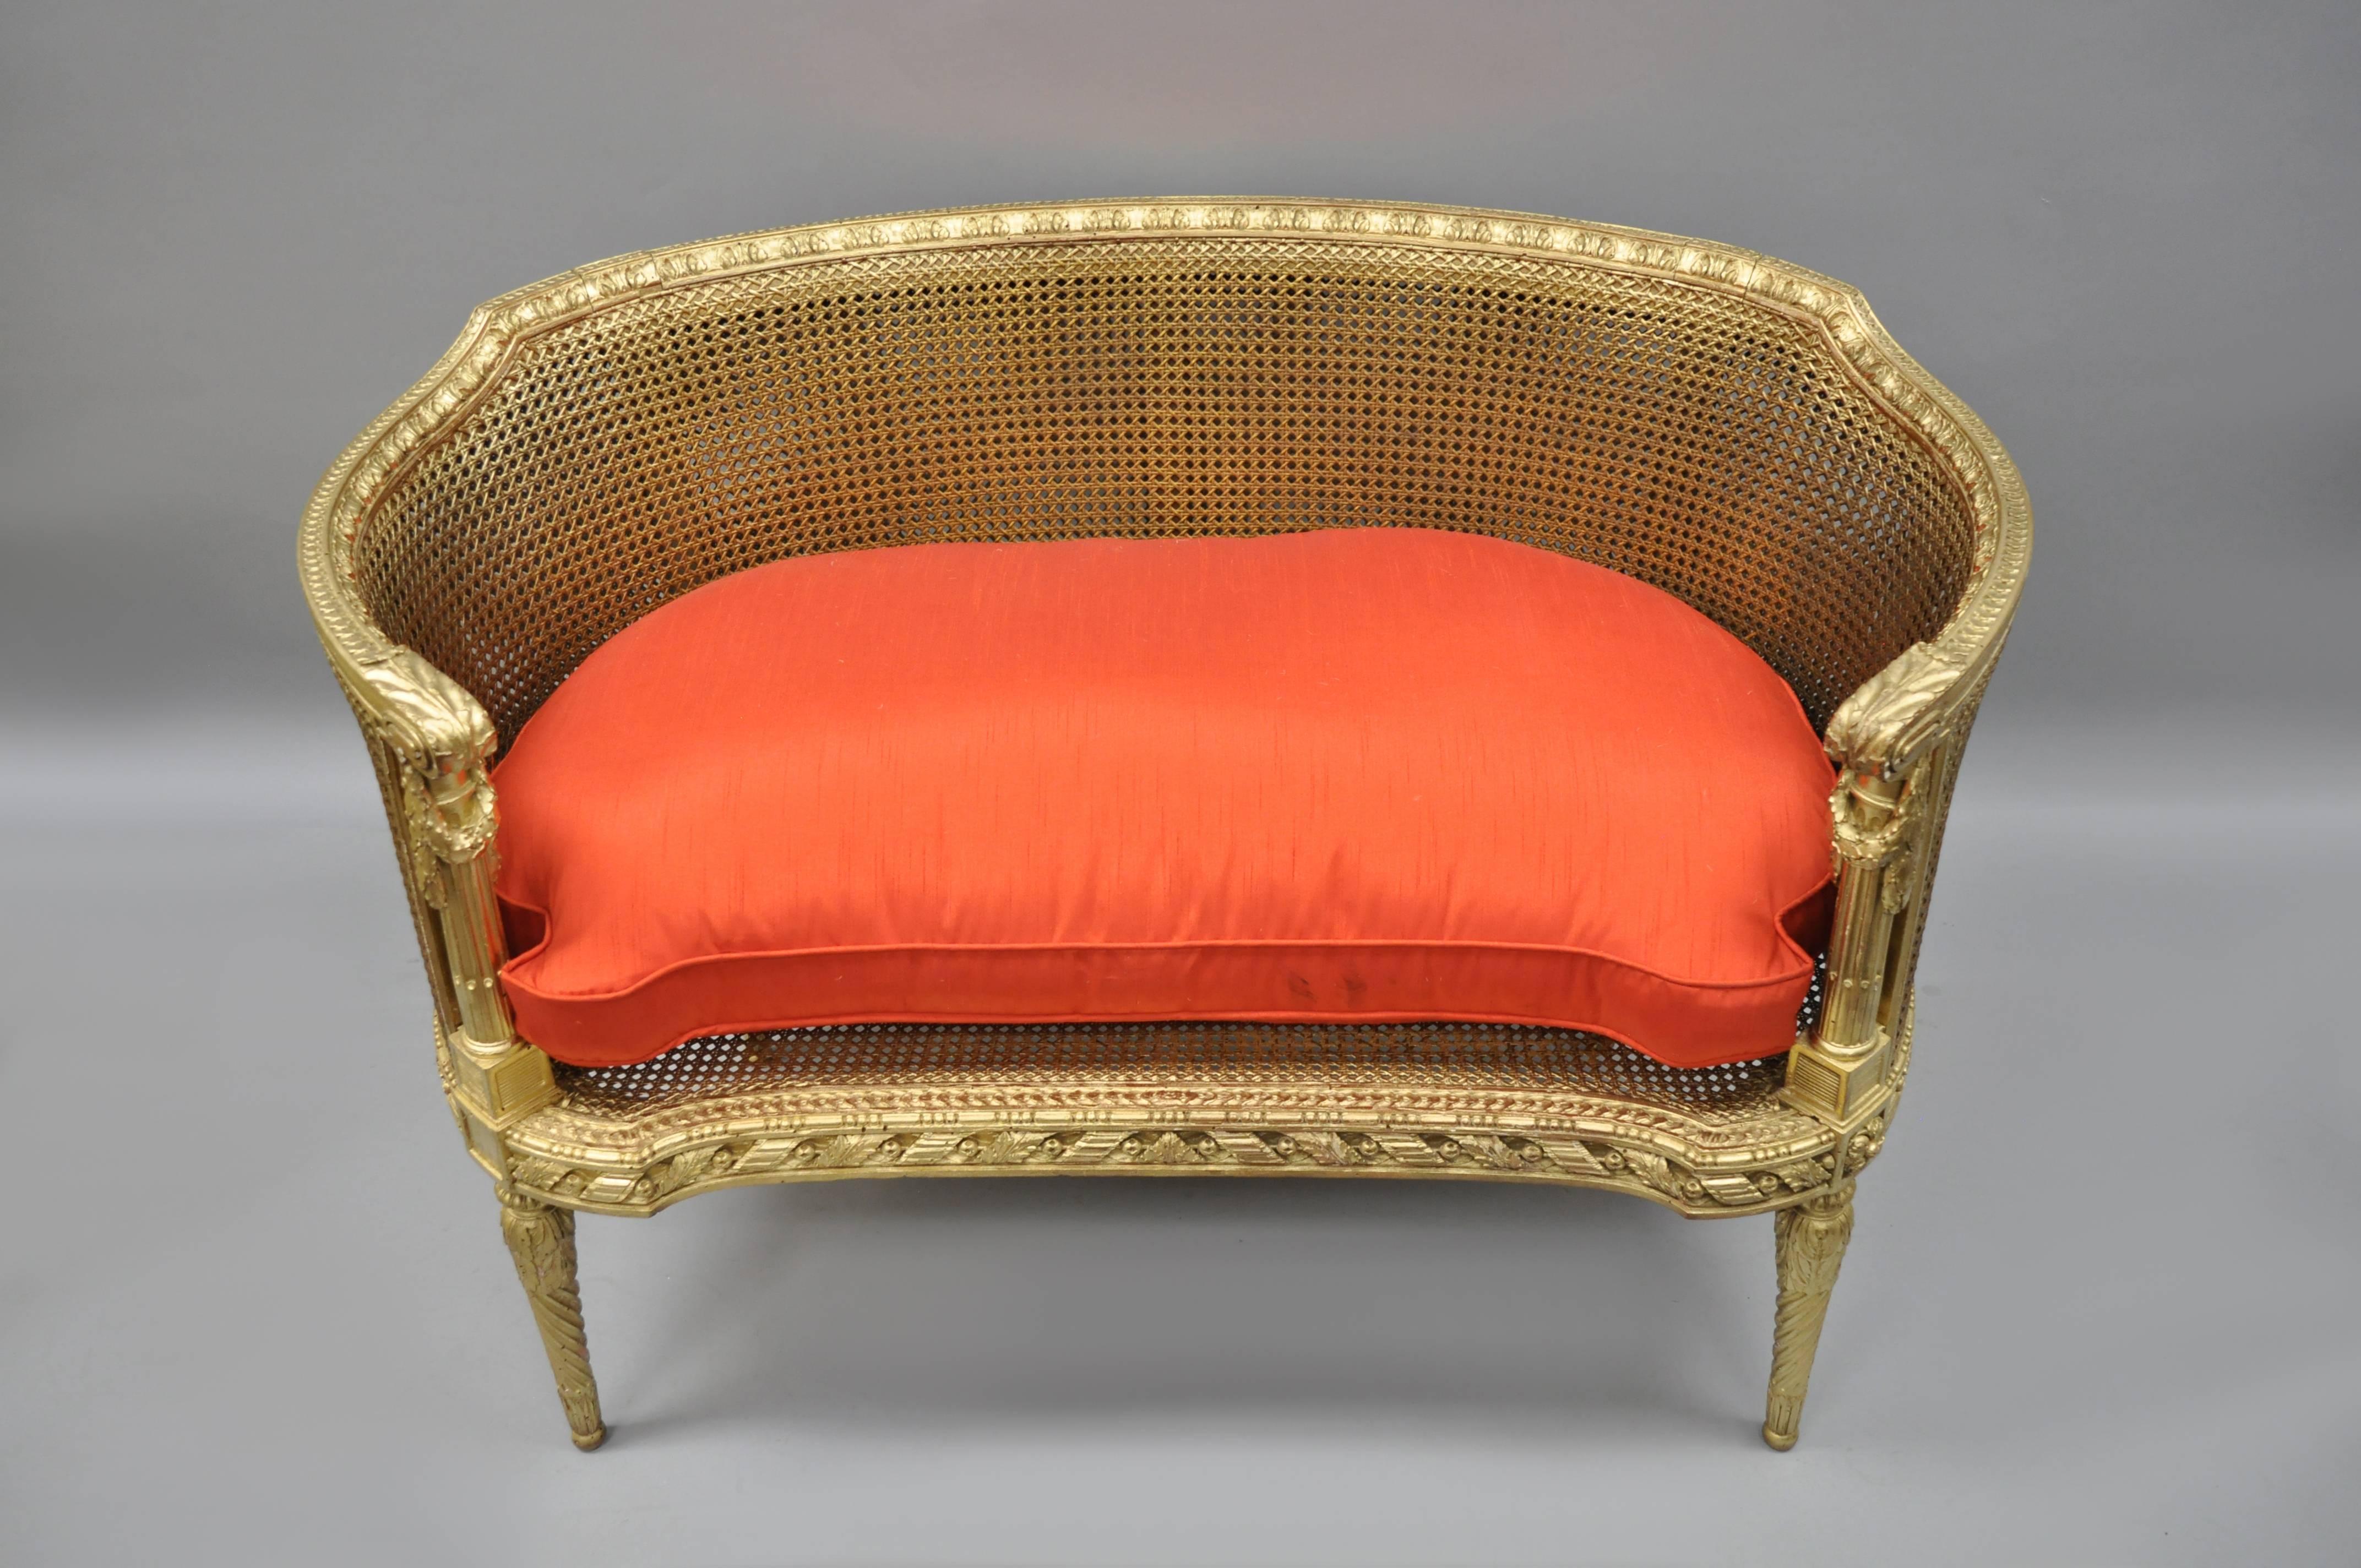 Antique French Louis XVI Style Gold Cane Giltwood Oval Settee Loveseat Bench 6